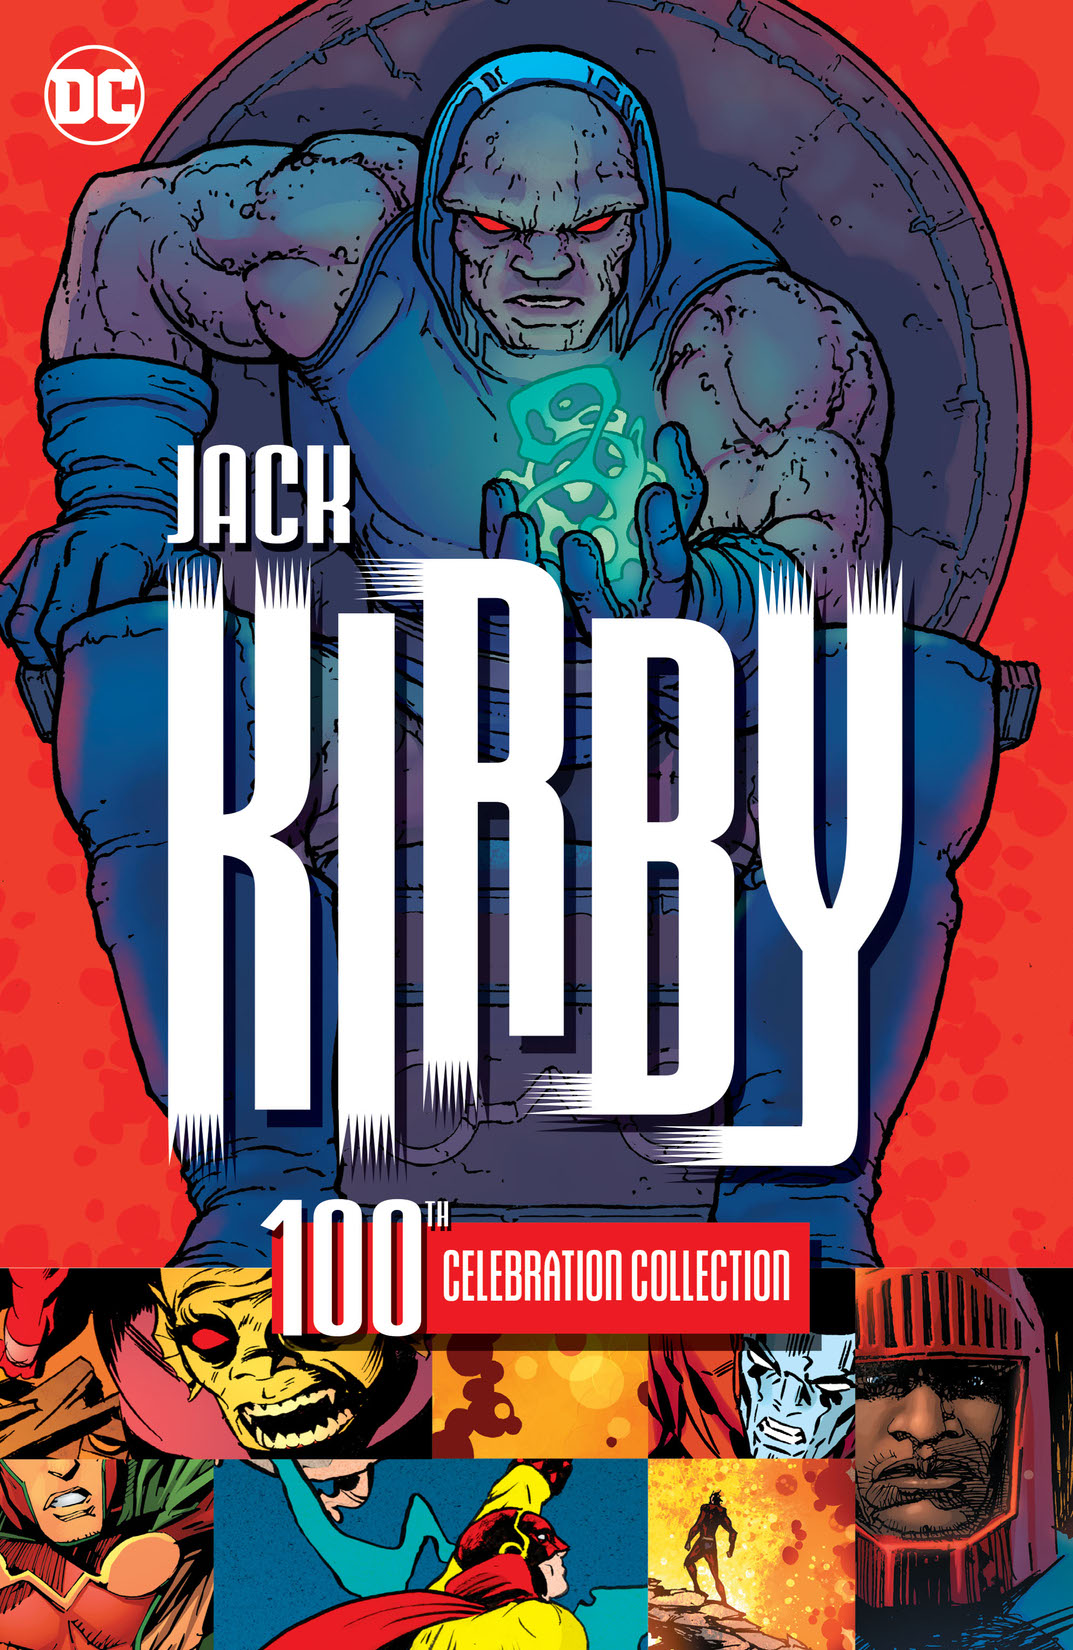 Jack Kirby 100th Celebration Collection preview images